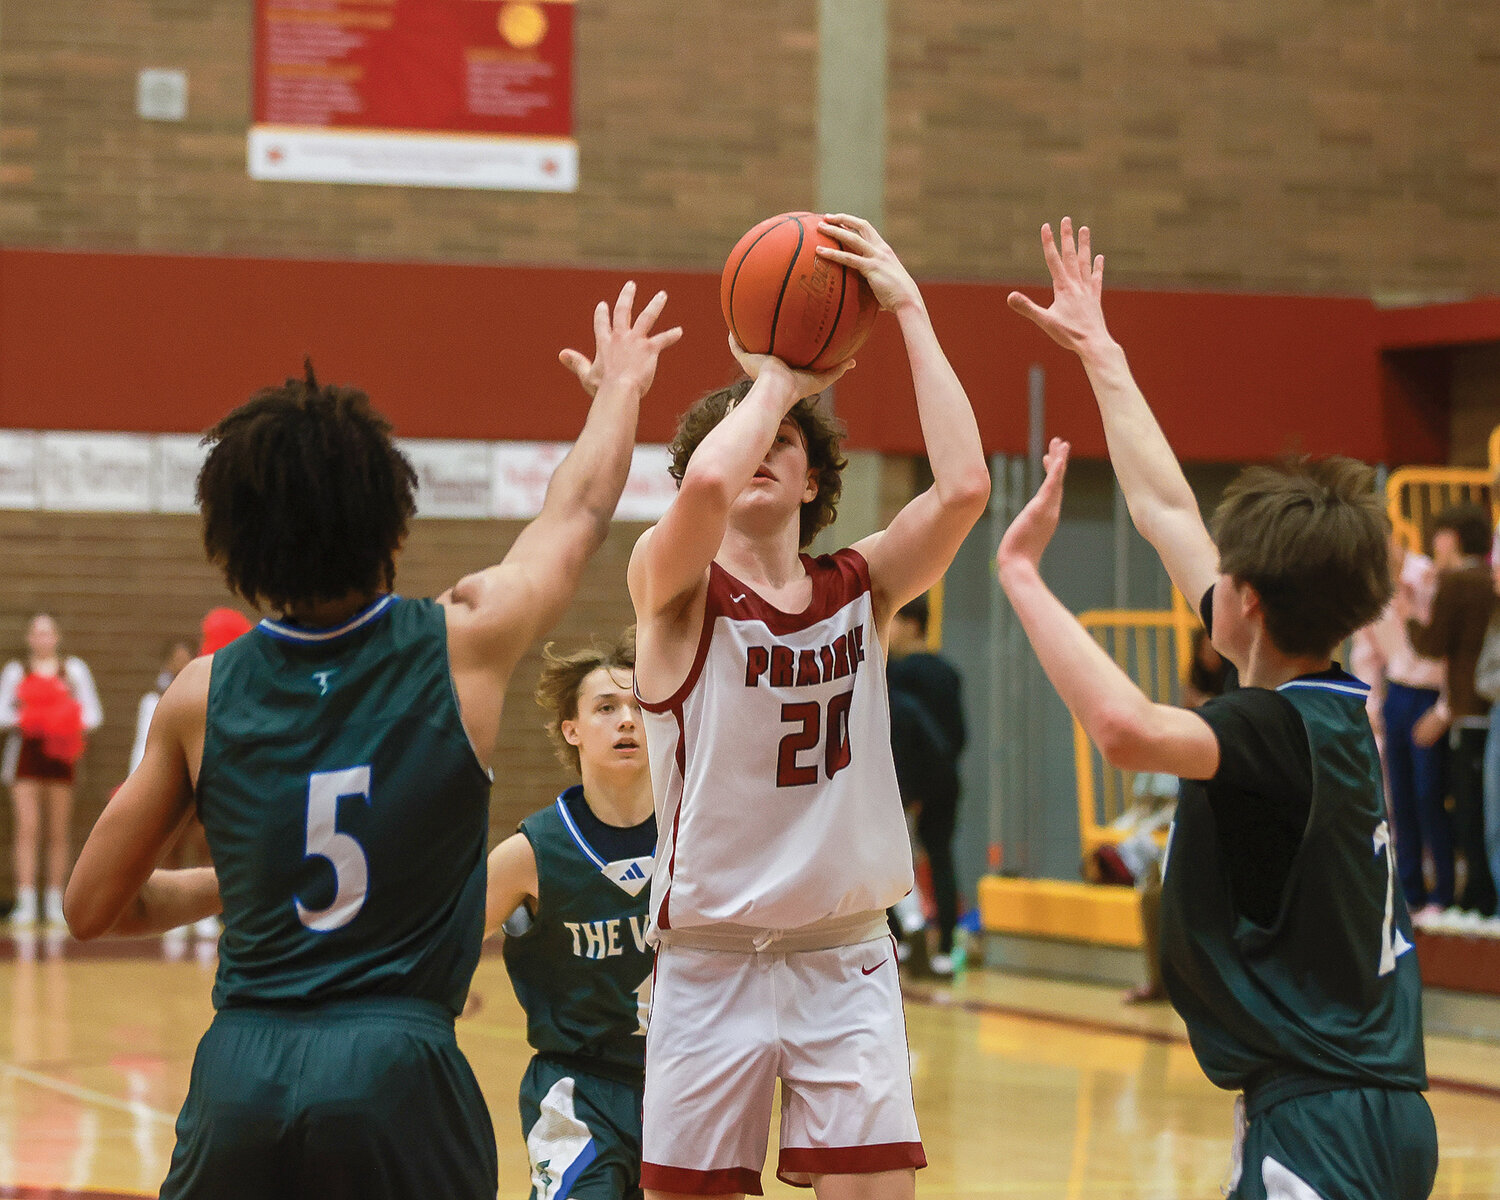 Prairie sophomore forward Carson Morningstar attempts a shot during the Falcons’ 61-60 win over Mountain View on Wednesday, Jan. 25.